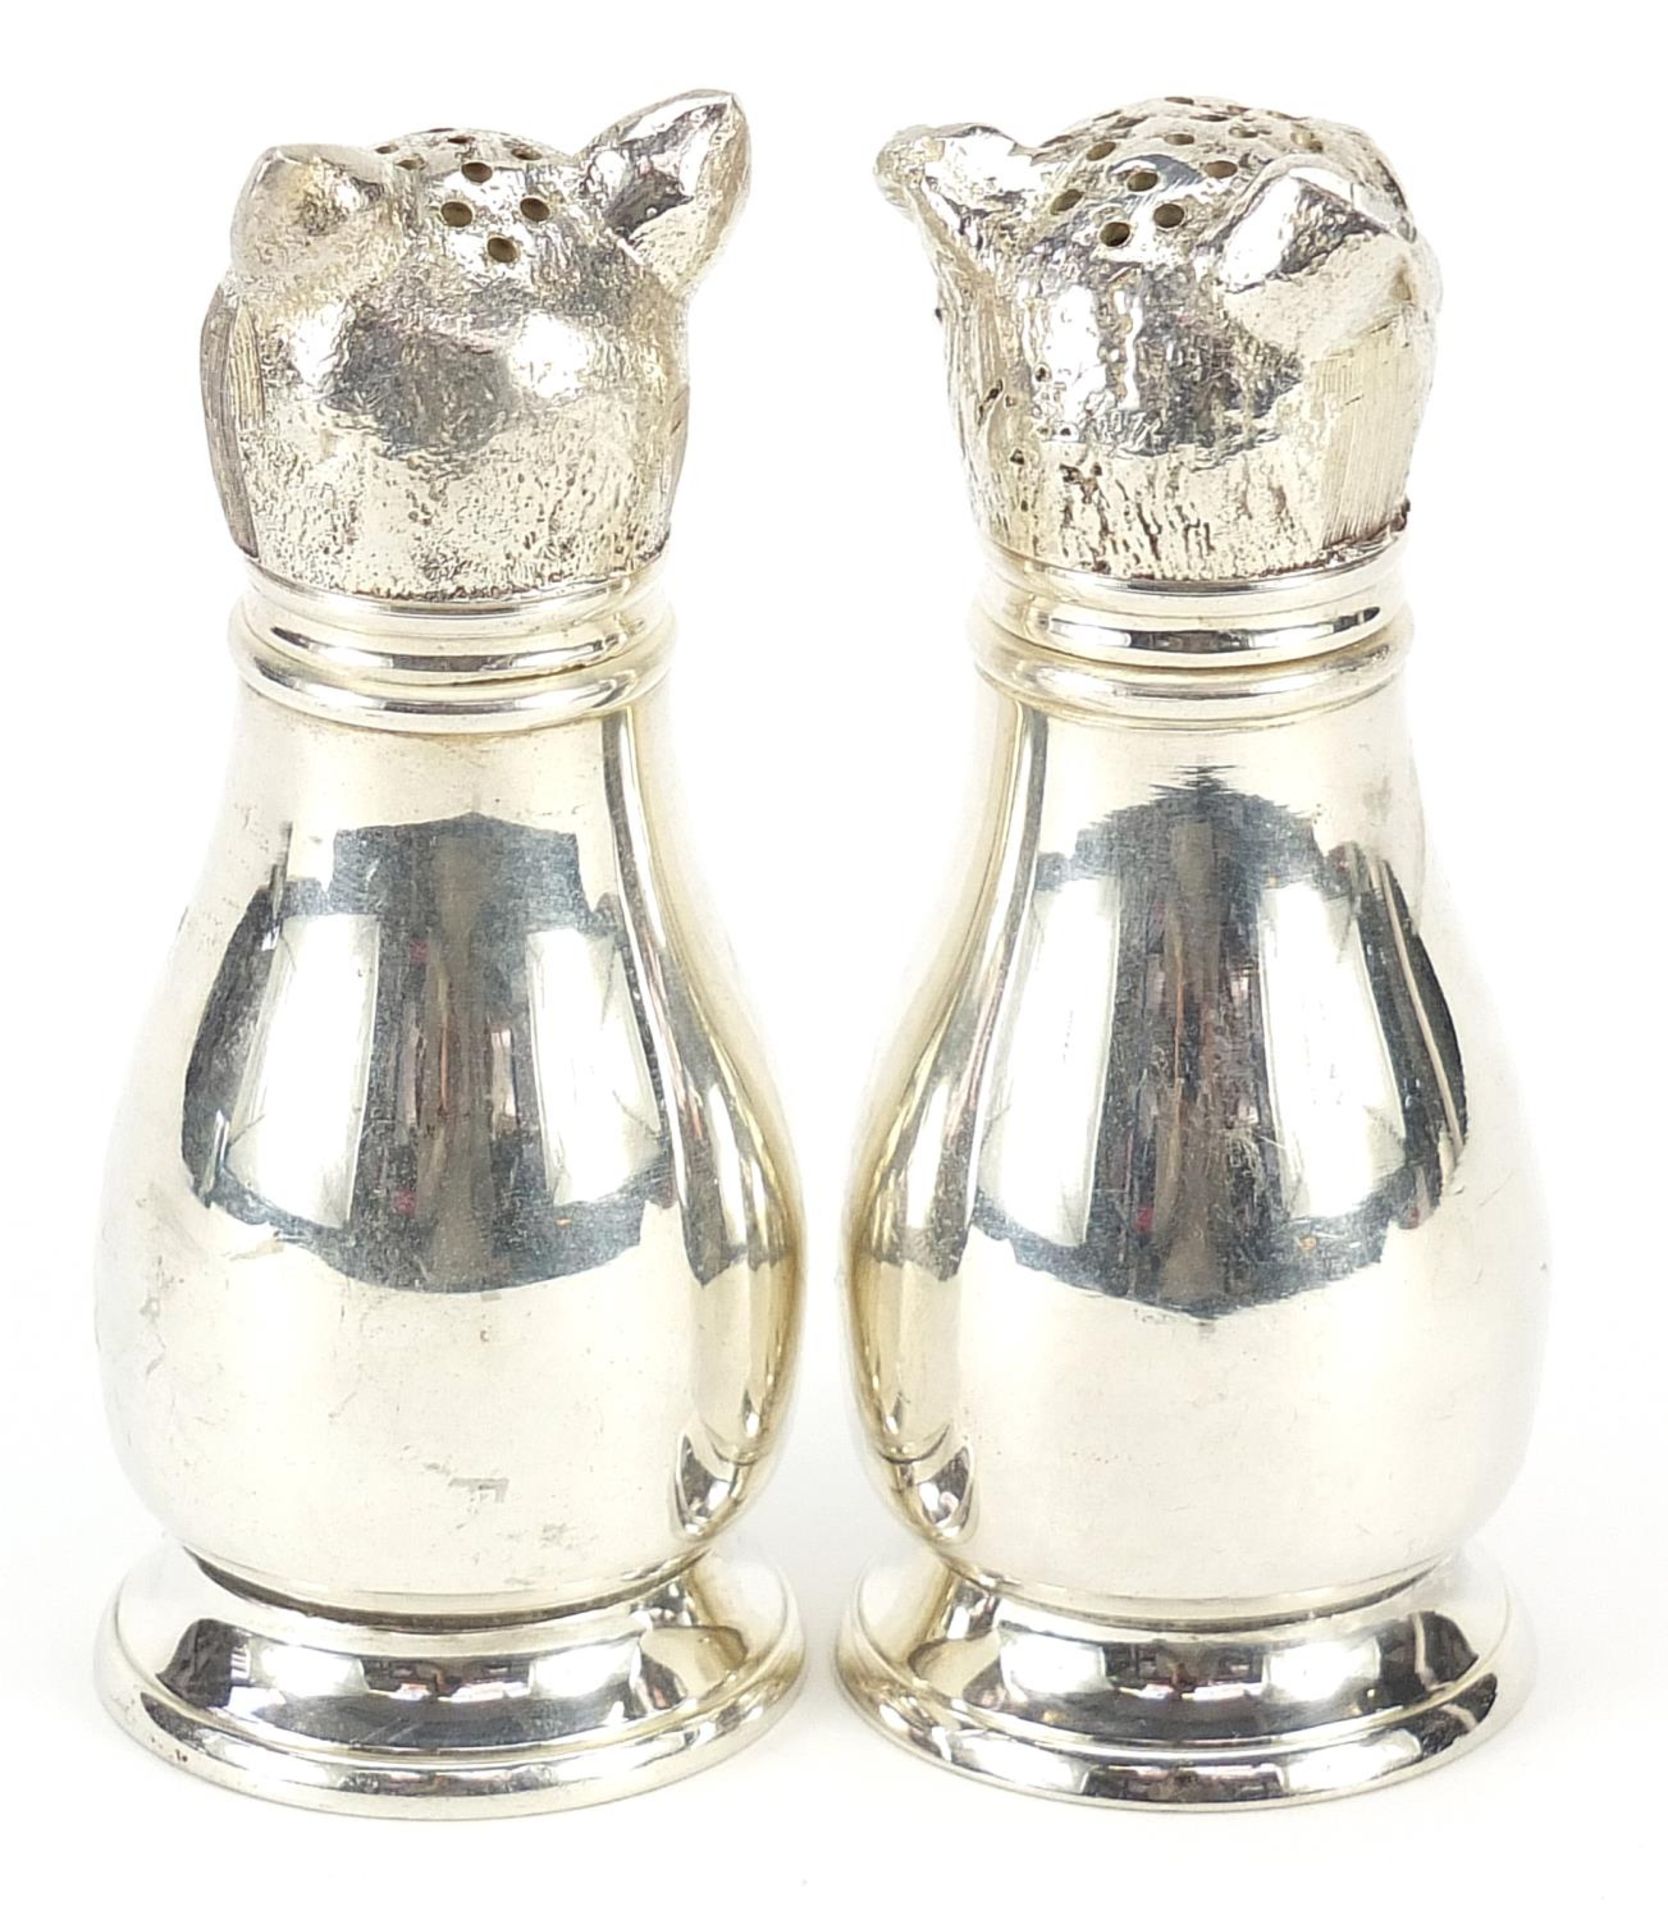 Pair of novelty silver plated cat and dog casters, 11cm high - Image 2 of 4